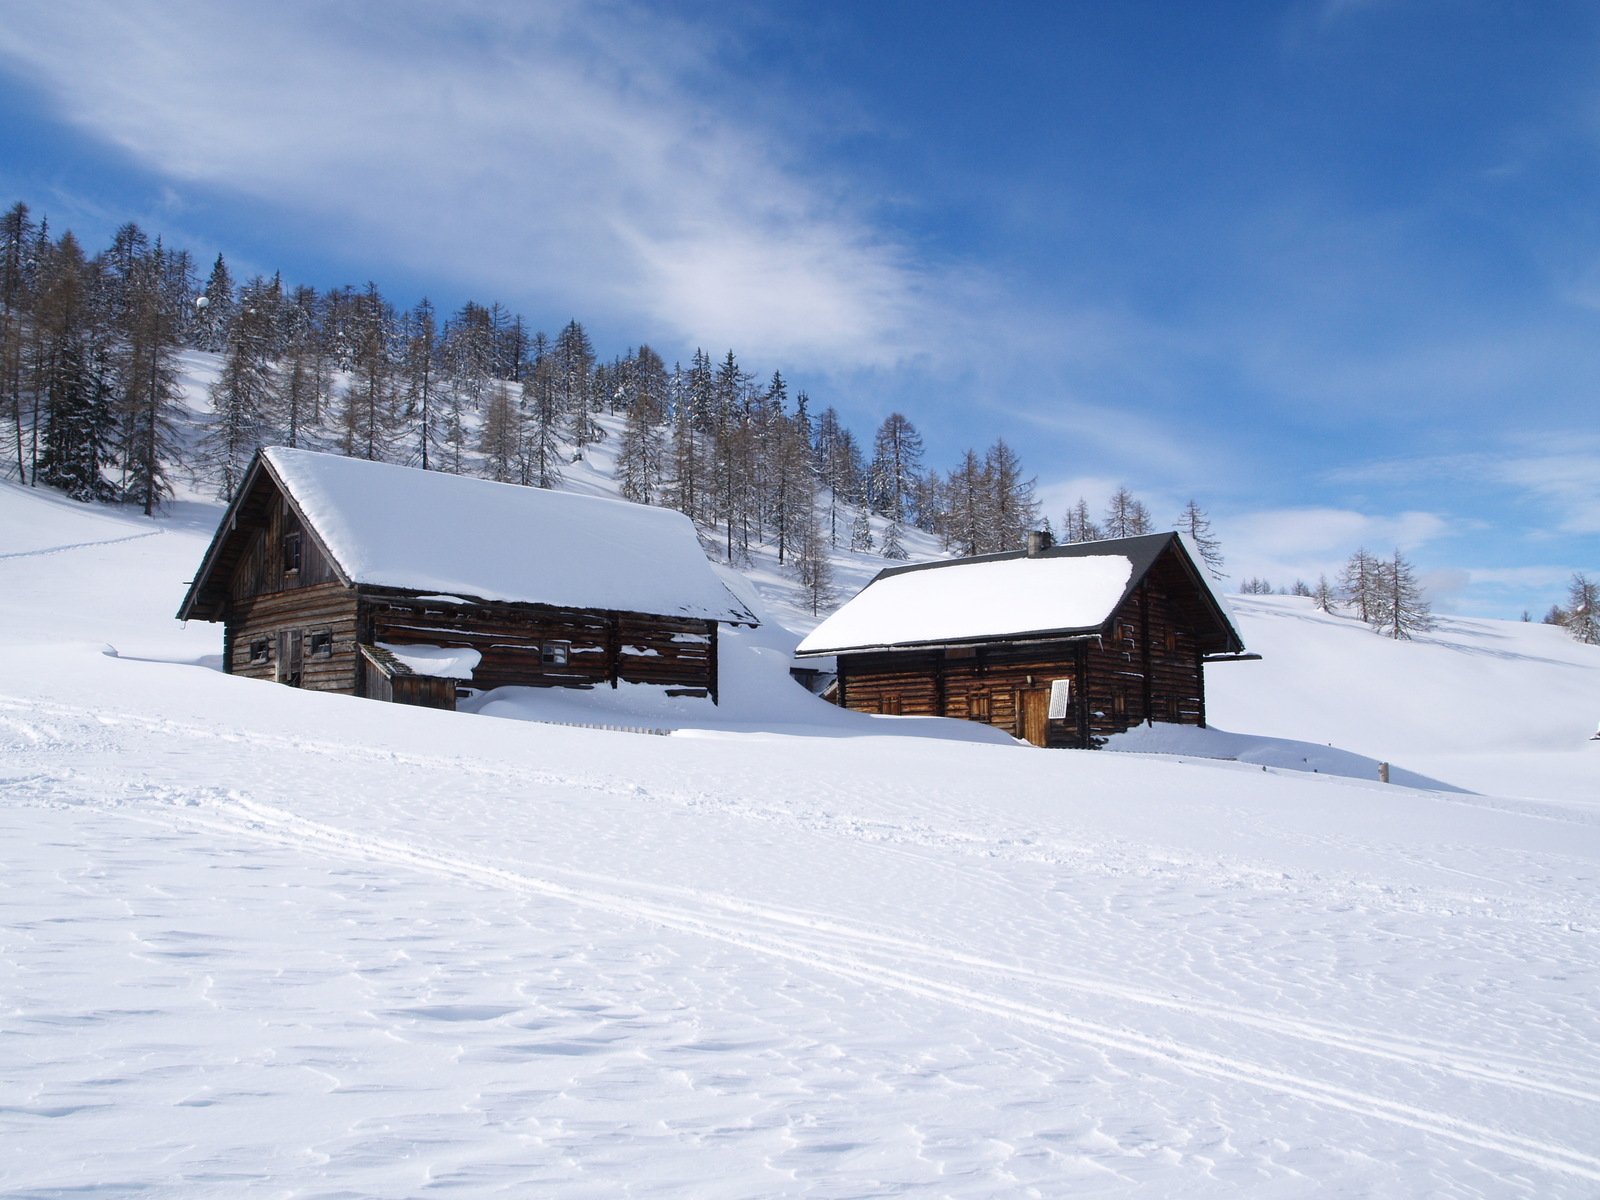 a snowy landscape with two barns near by